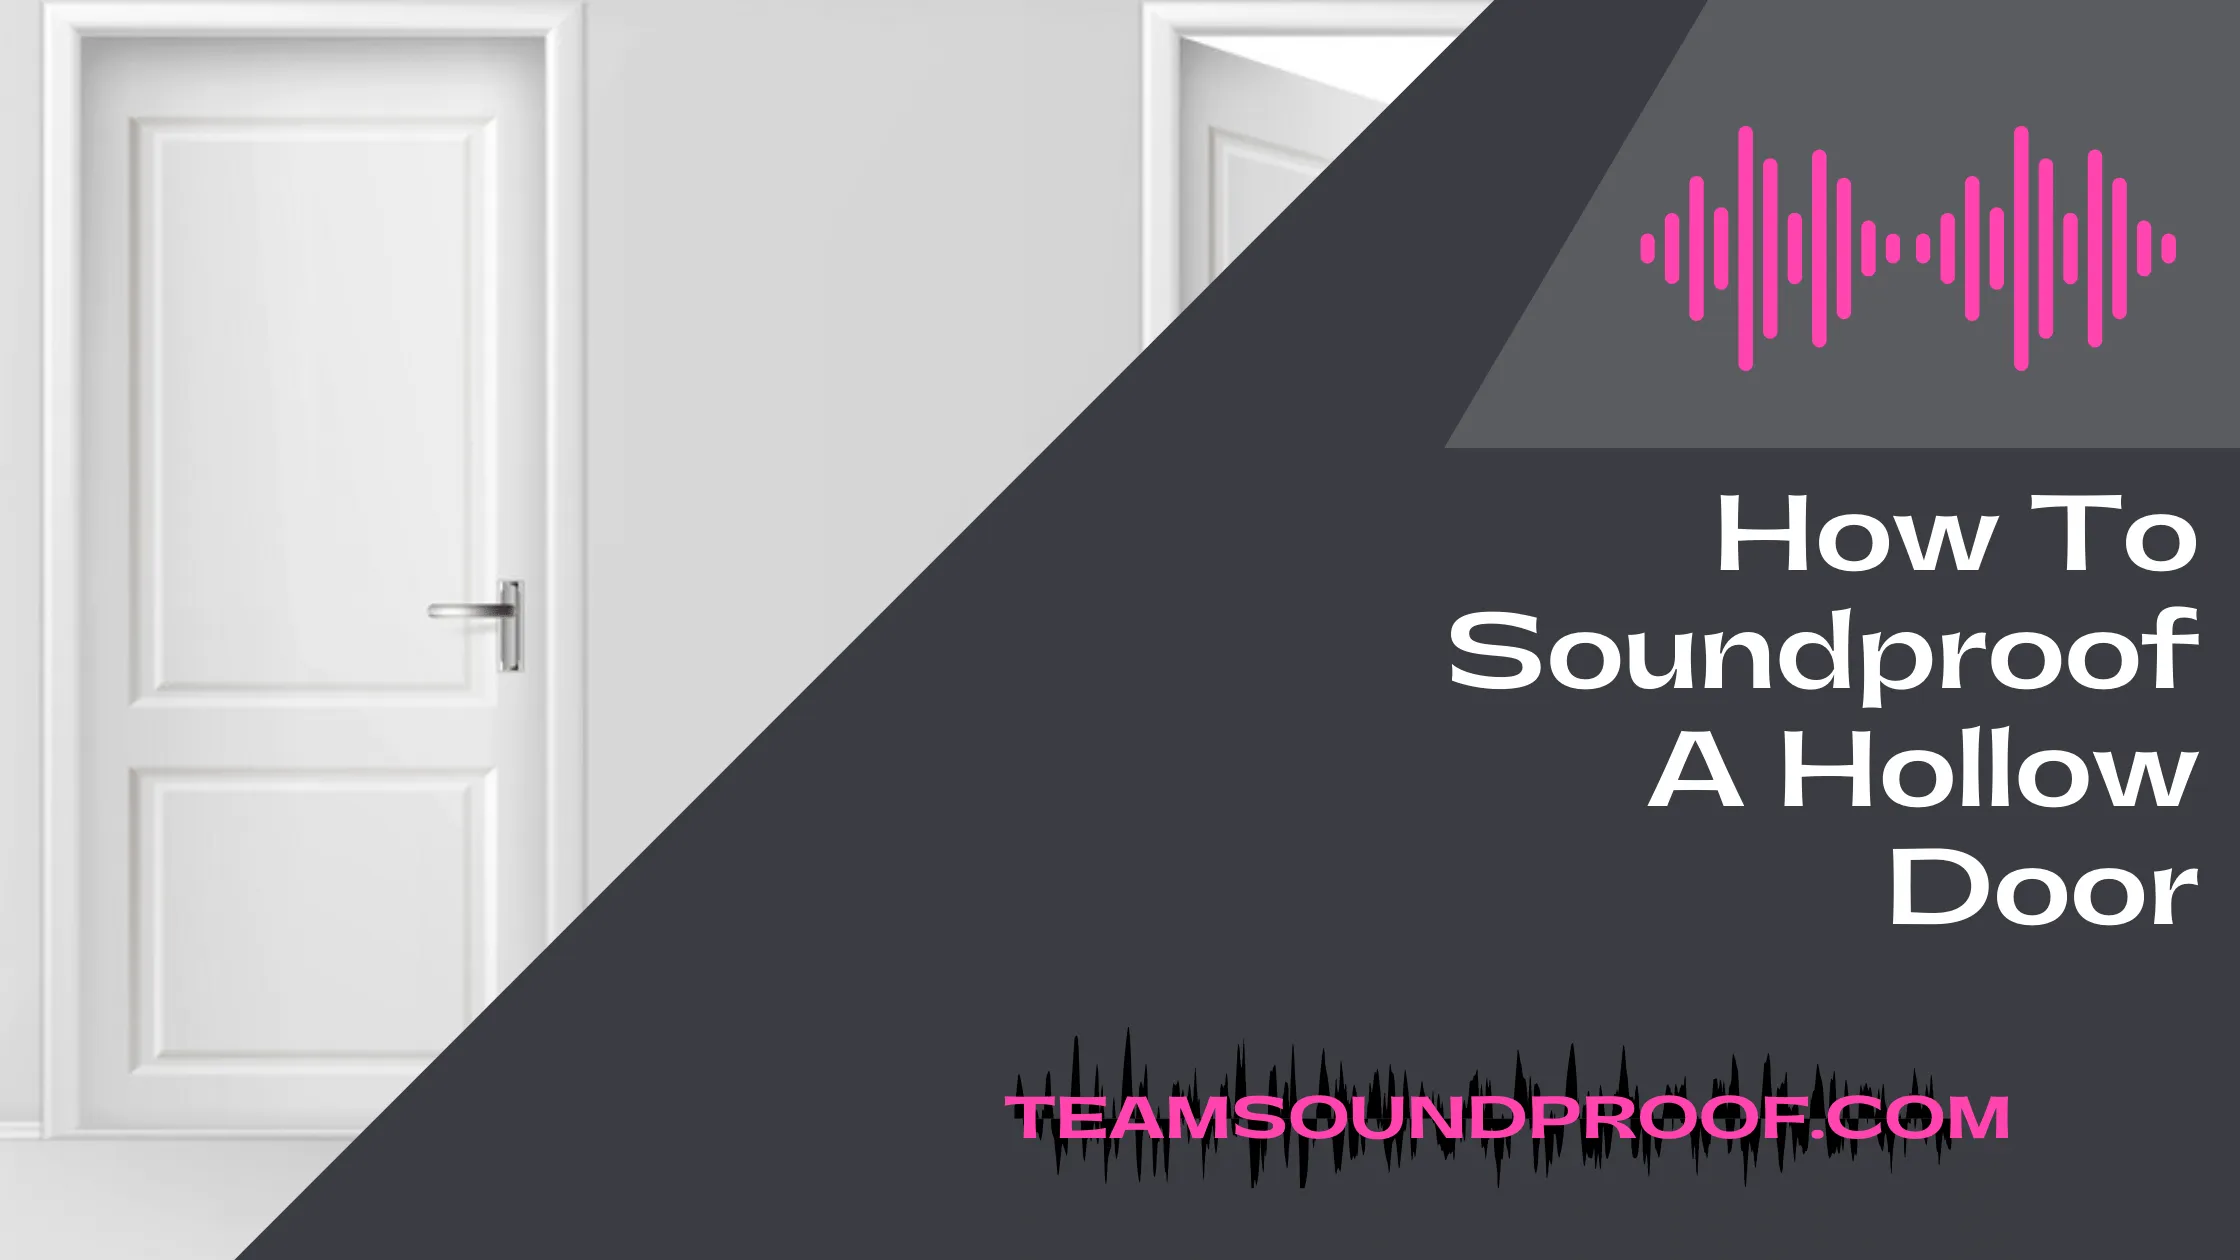 How to Soundproof a Hollow Door? - Easy Guide